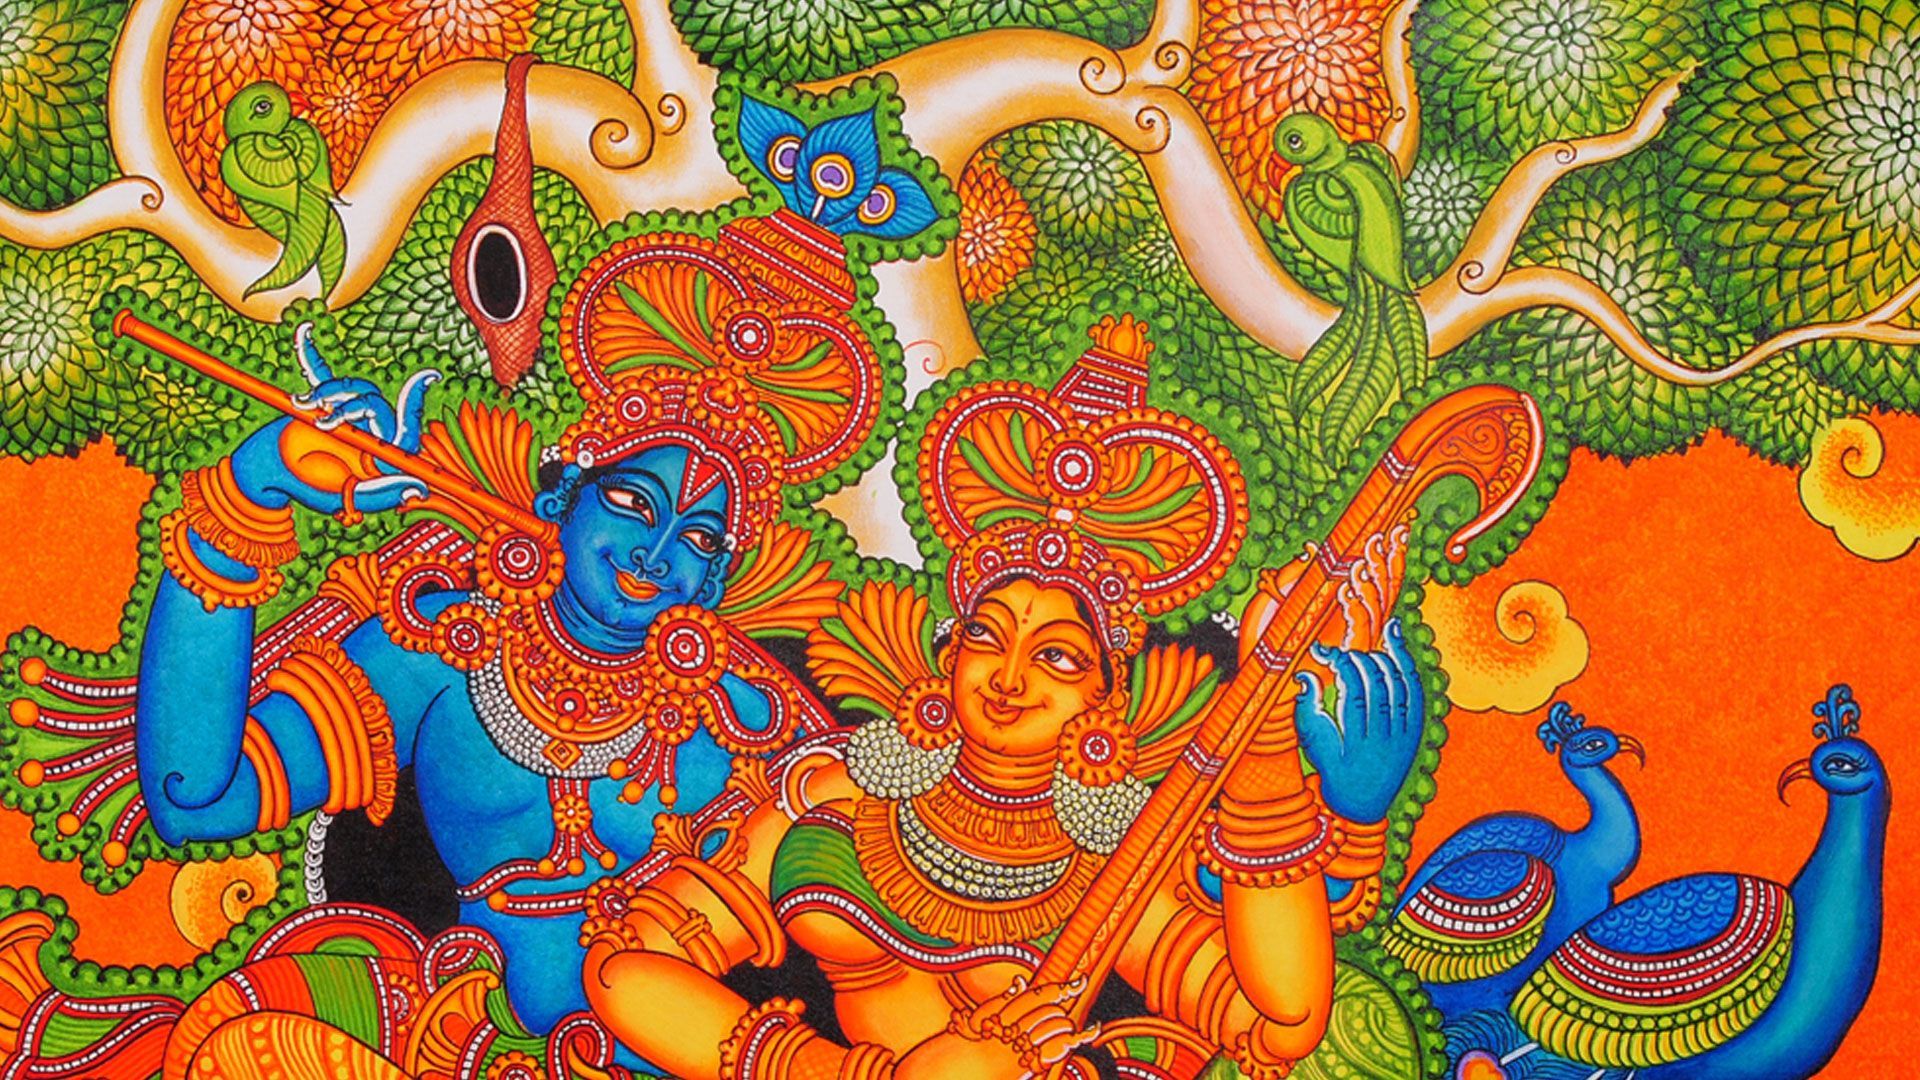 hd pics photo stunning attractive indian traditional hindu mural painting old 10 HD desktop background wallpaper. Mural painting, Wall paint designs, Painting